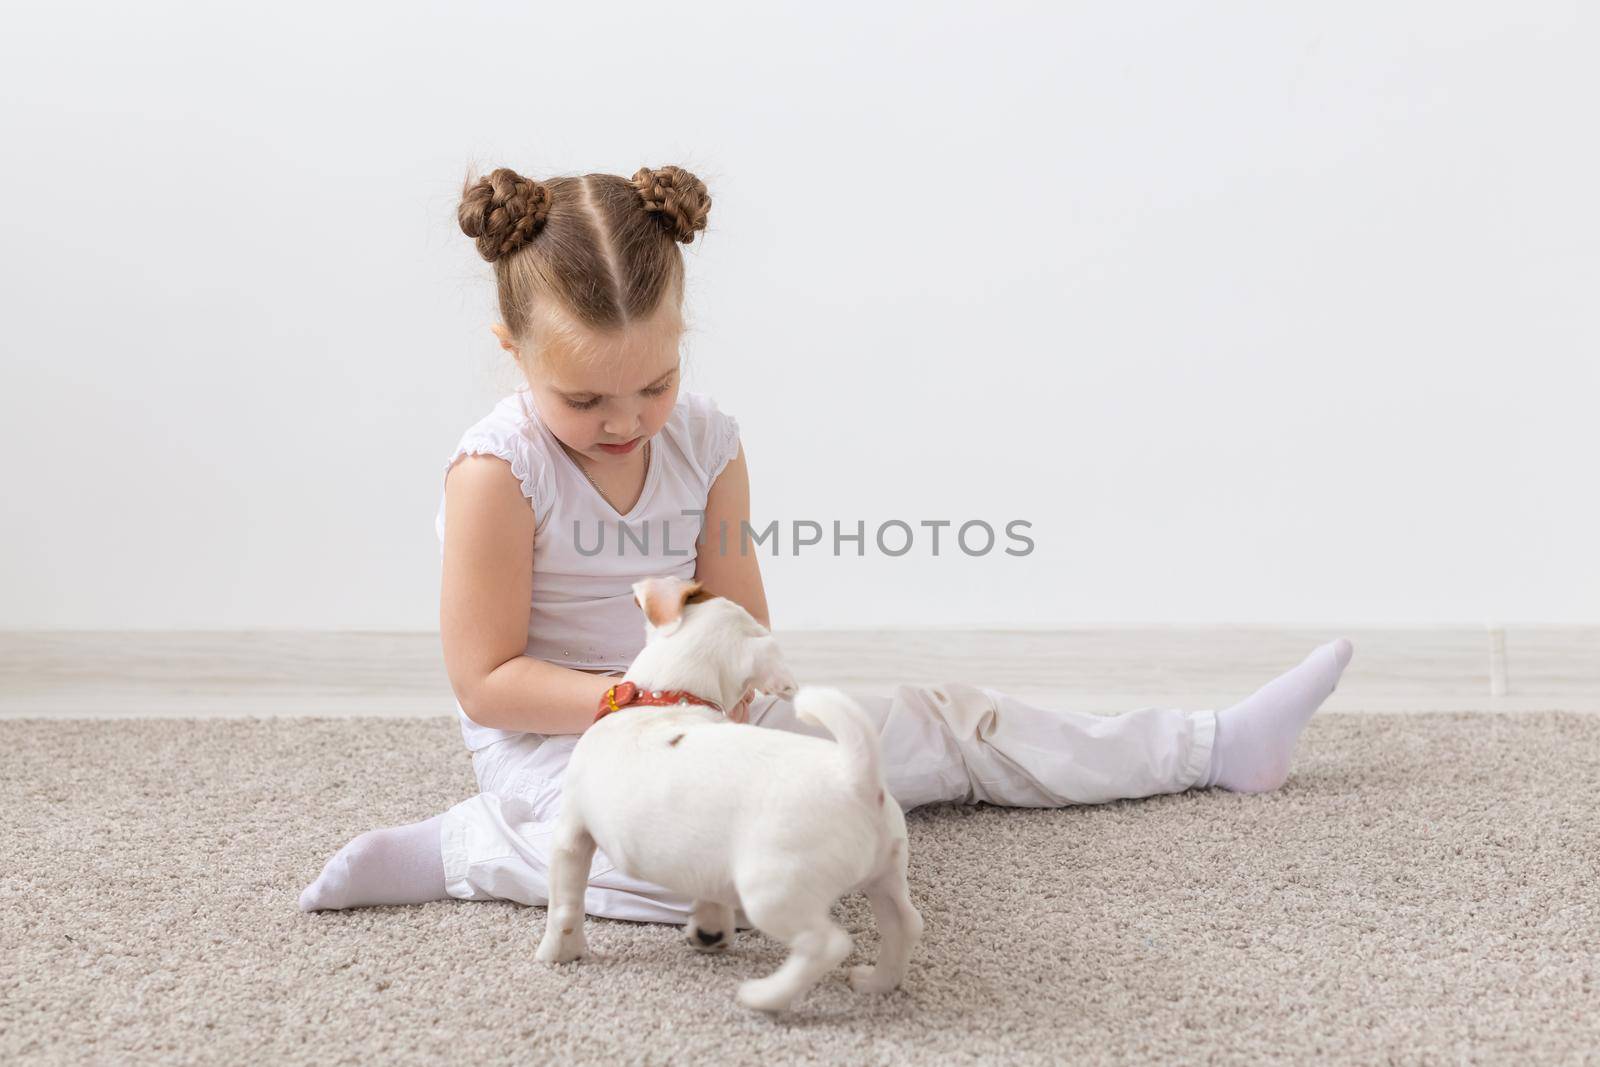 Childhood, pets and dogs concept - Little puppy and child girl in white shirt having fun by Satura86